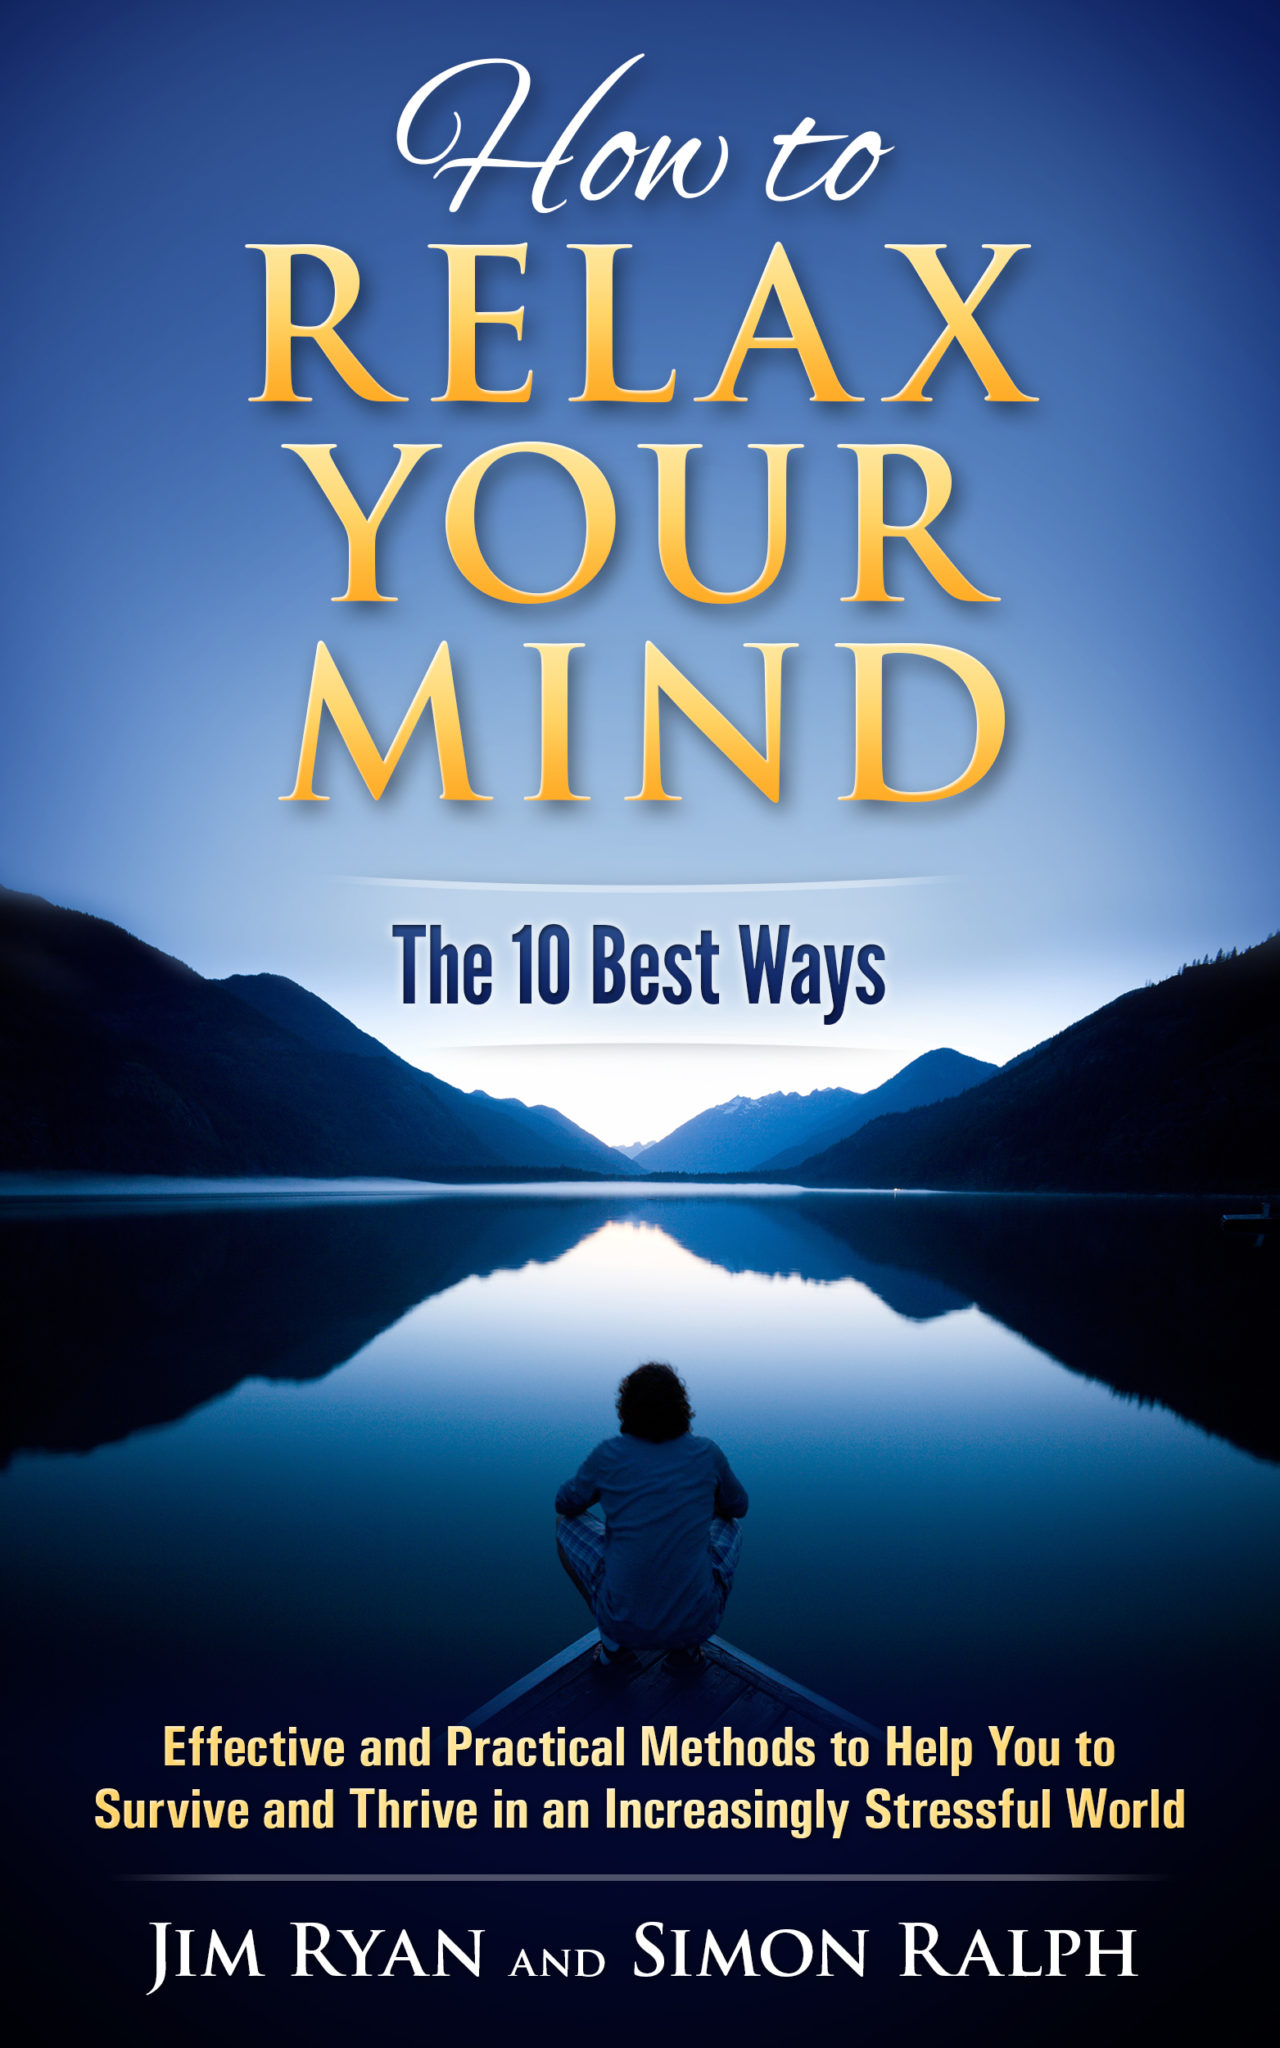 FREE: How to Relax Your Mind – The 10 Best Ways by Simon Ralph